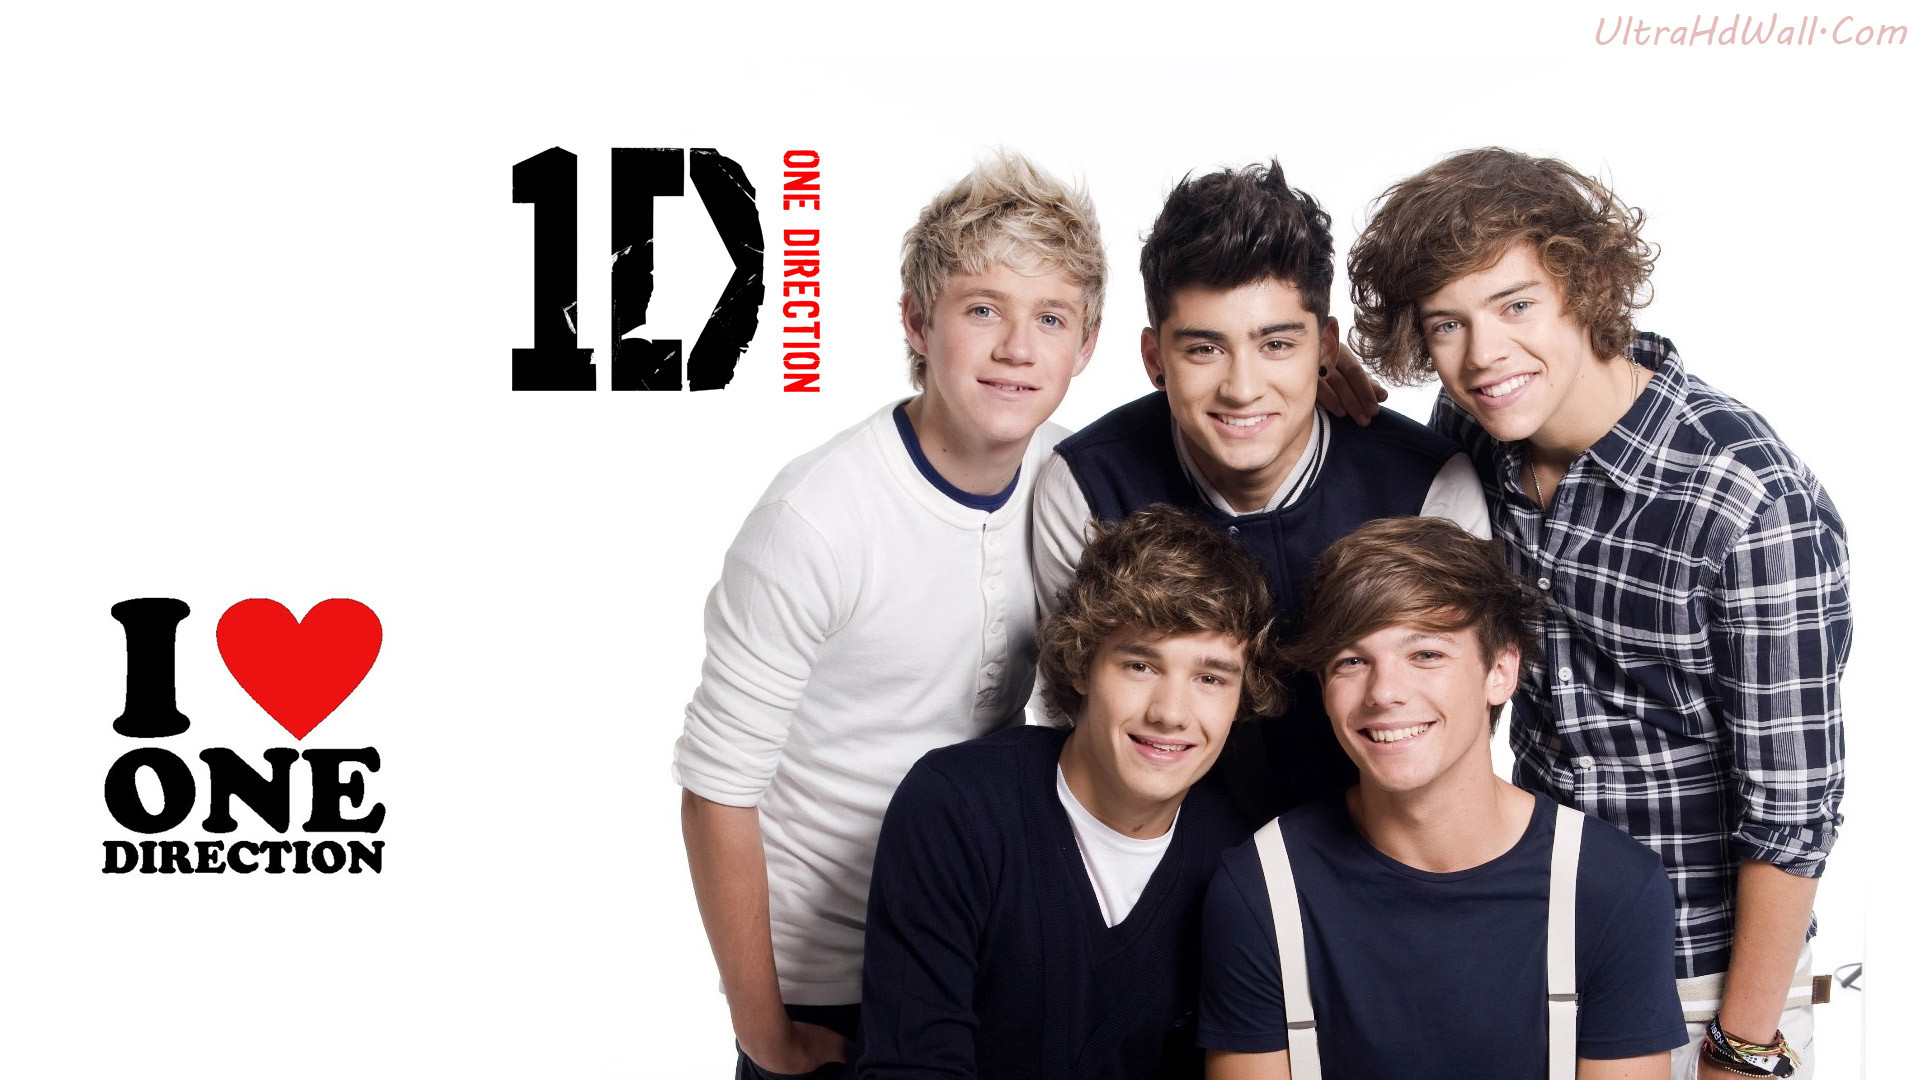 One Direction hd photos